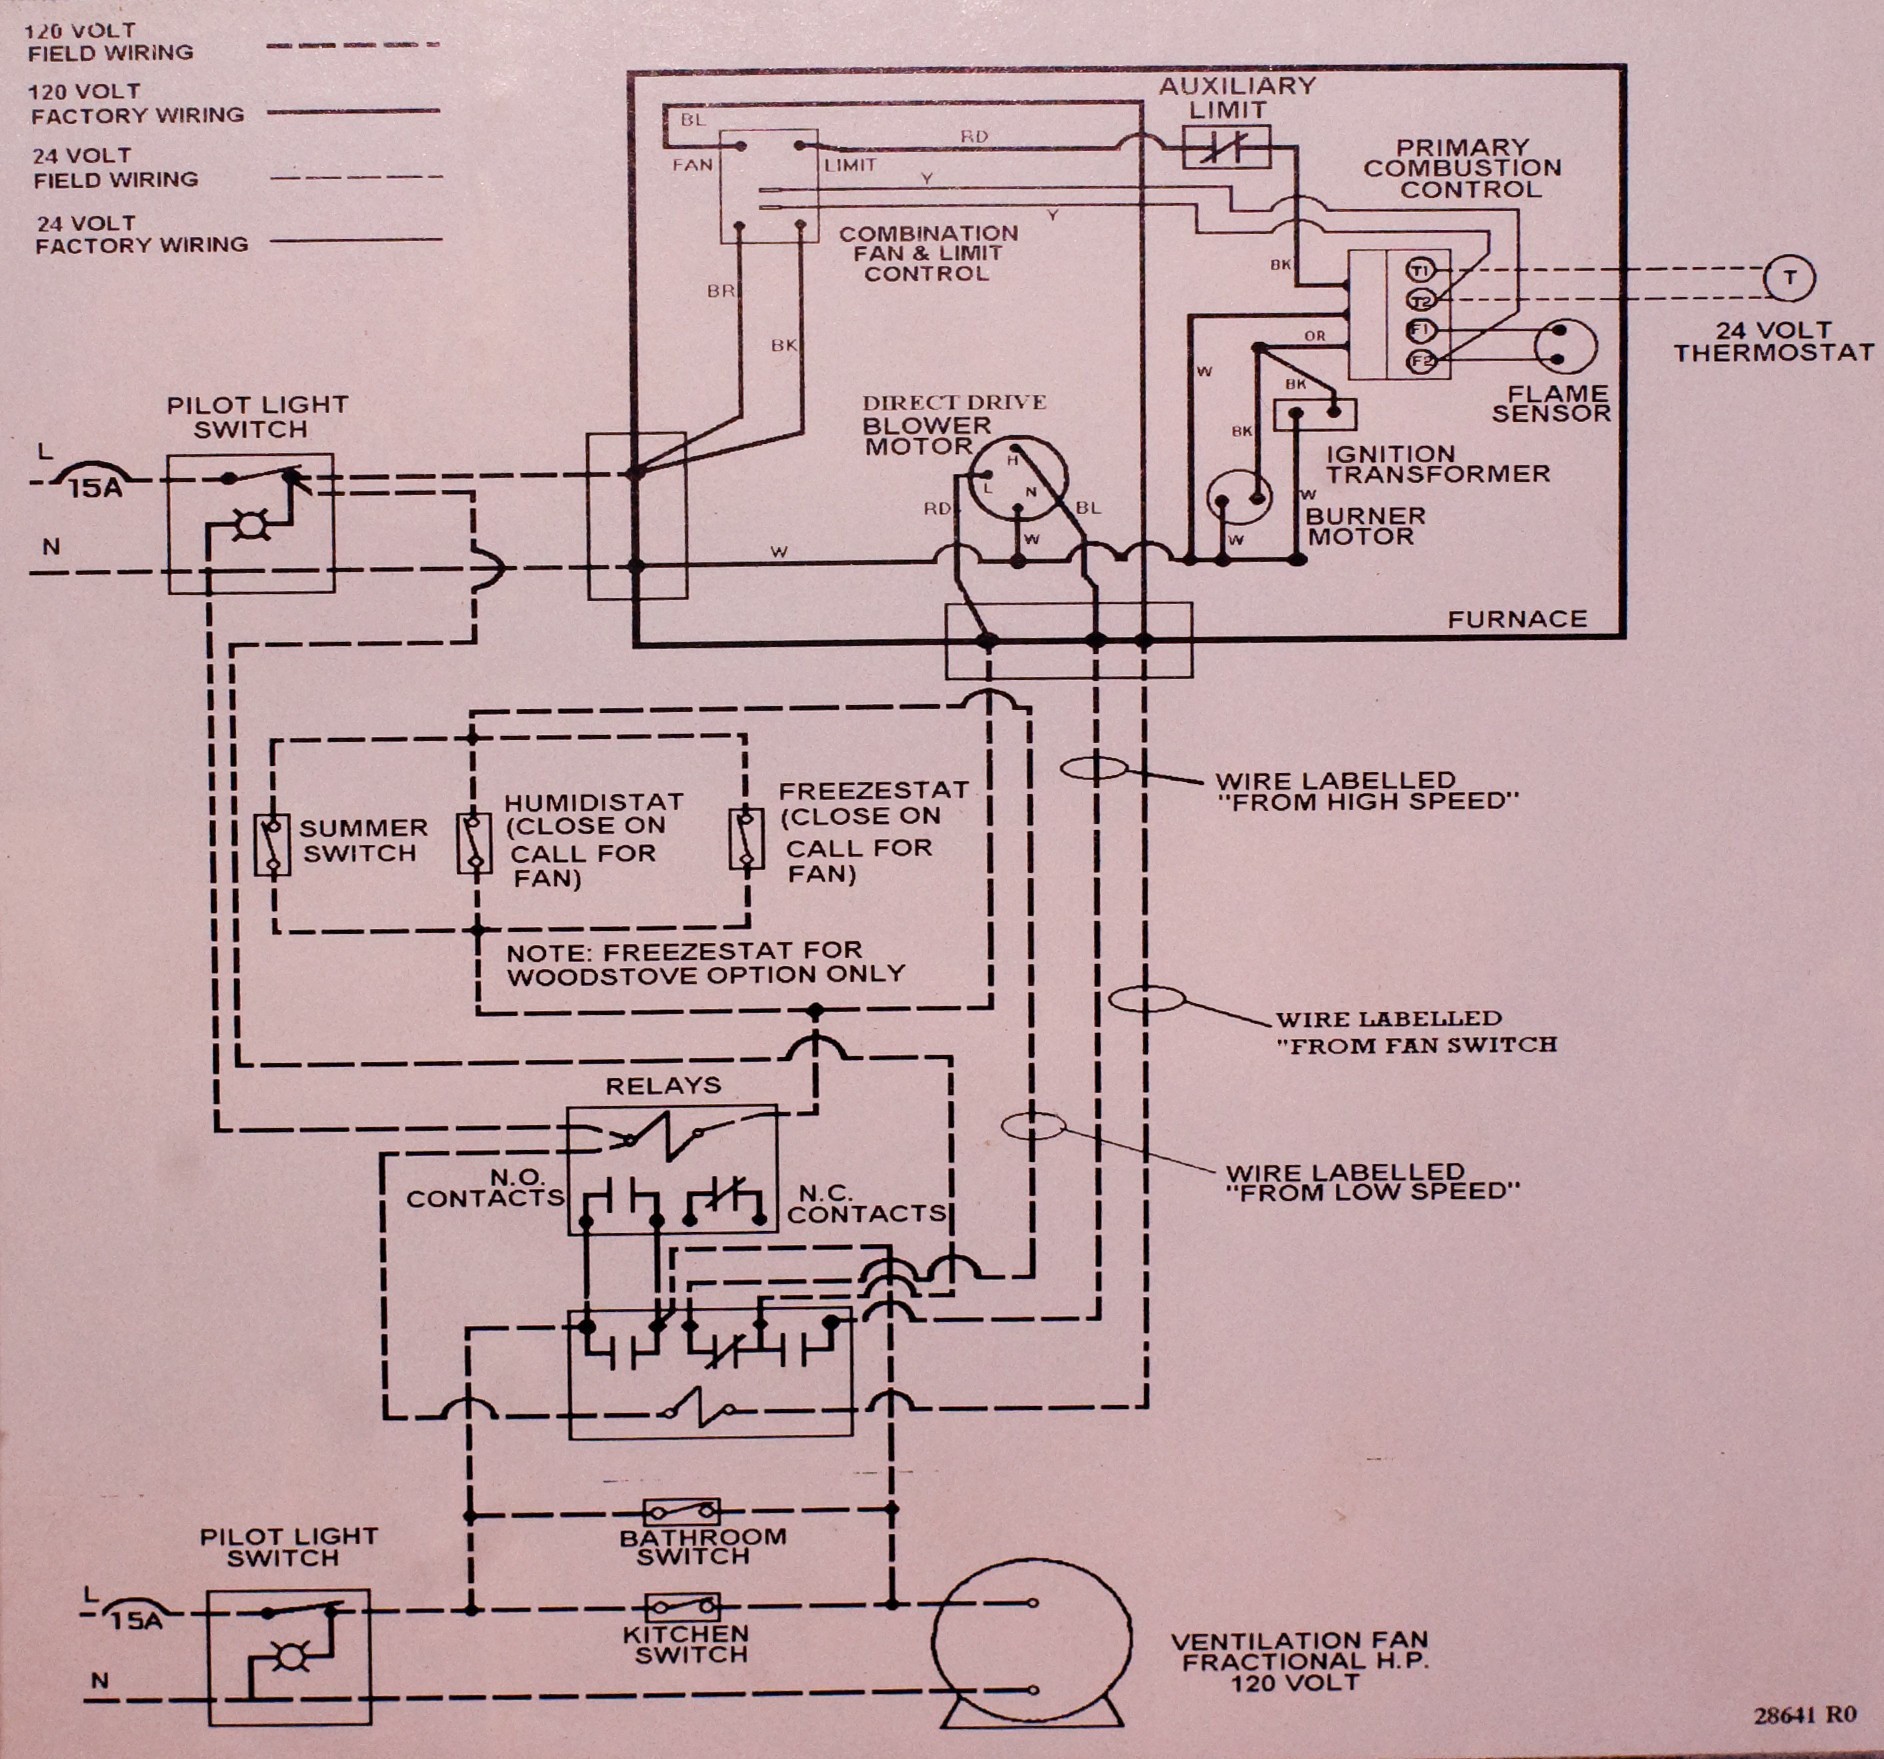 Williams Wall Furnace Wiring Diagram Best Wiring Diagram For Gas Furnace Thermostat Best Wiring Diagram For A